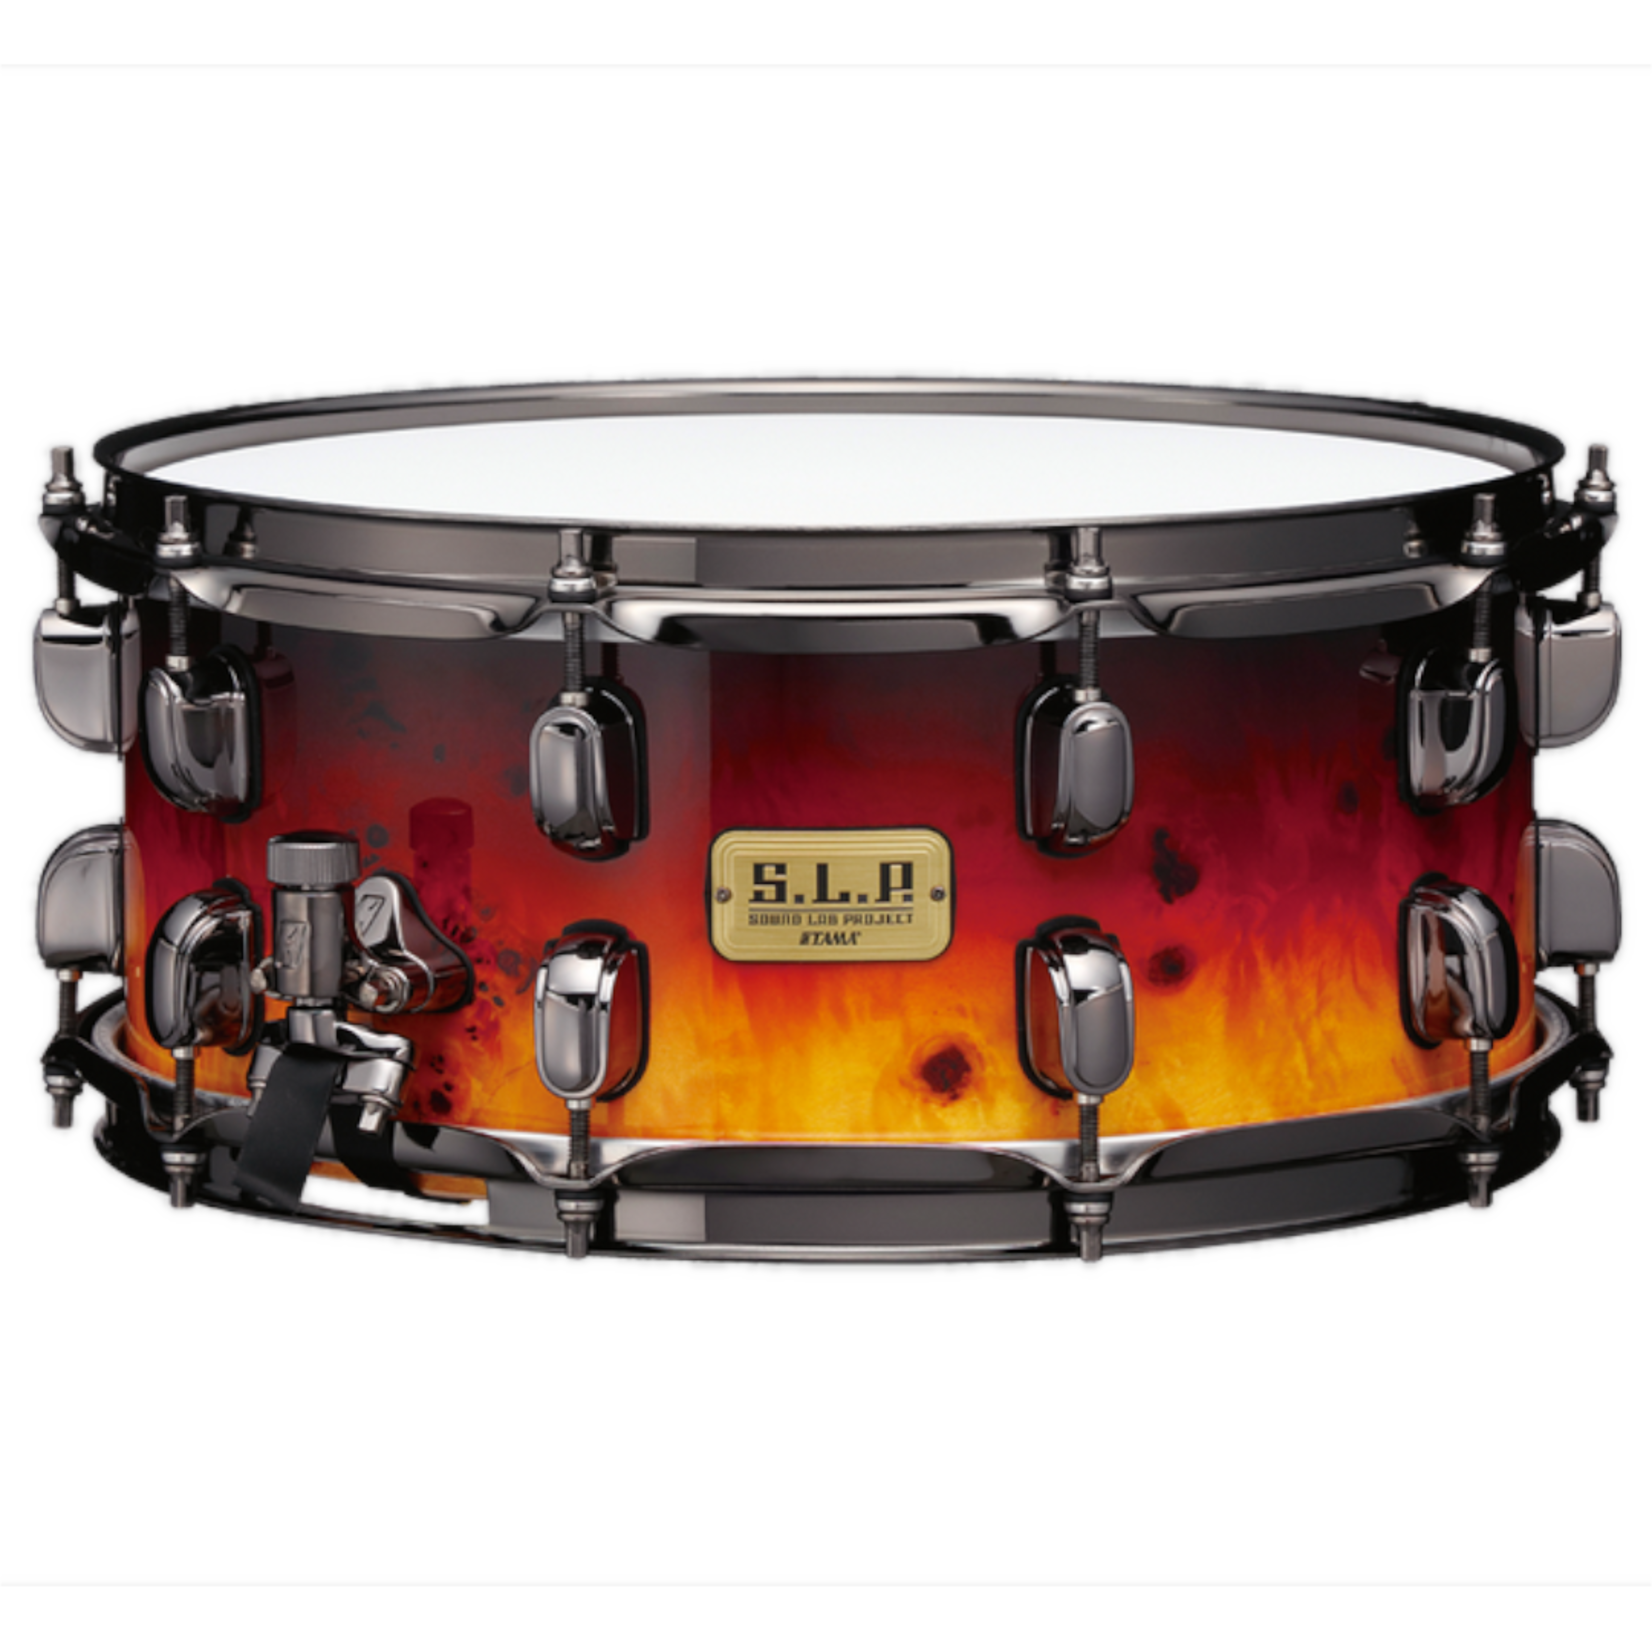 Tama Tama S.L.P. 6x14" G-Kapur Limited Edition Snare Drum LGK146ASF (Amber Sunset Fade over Mappa Burl)